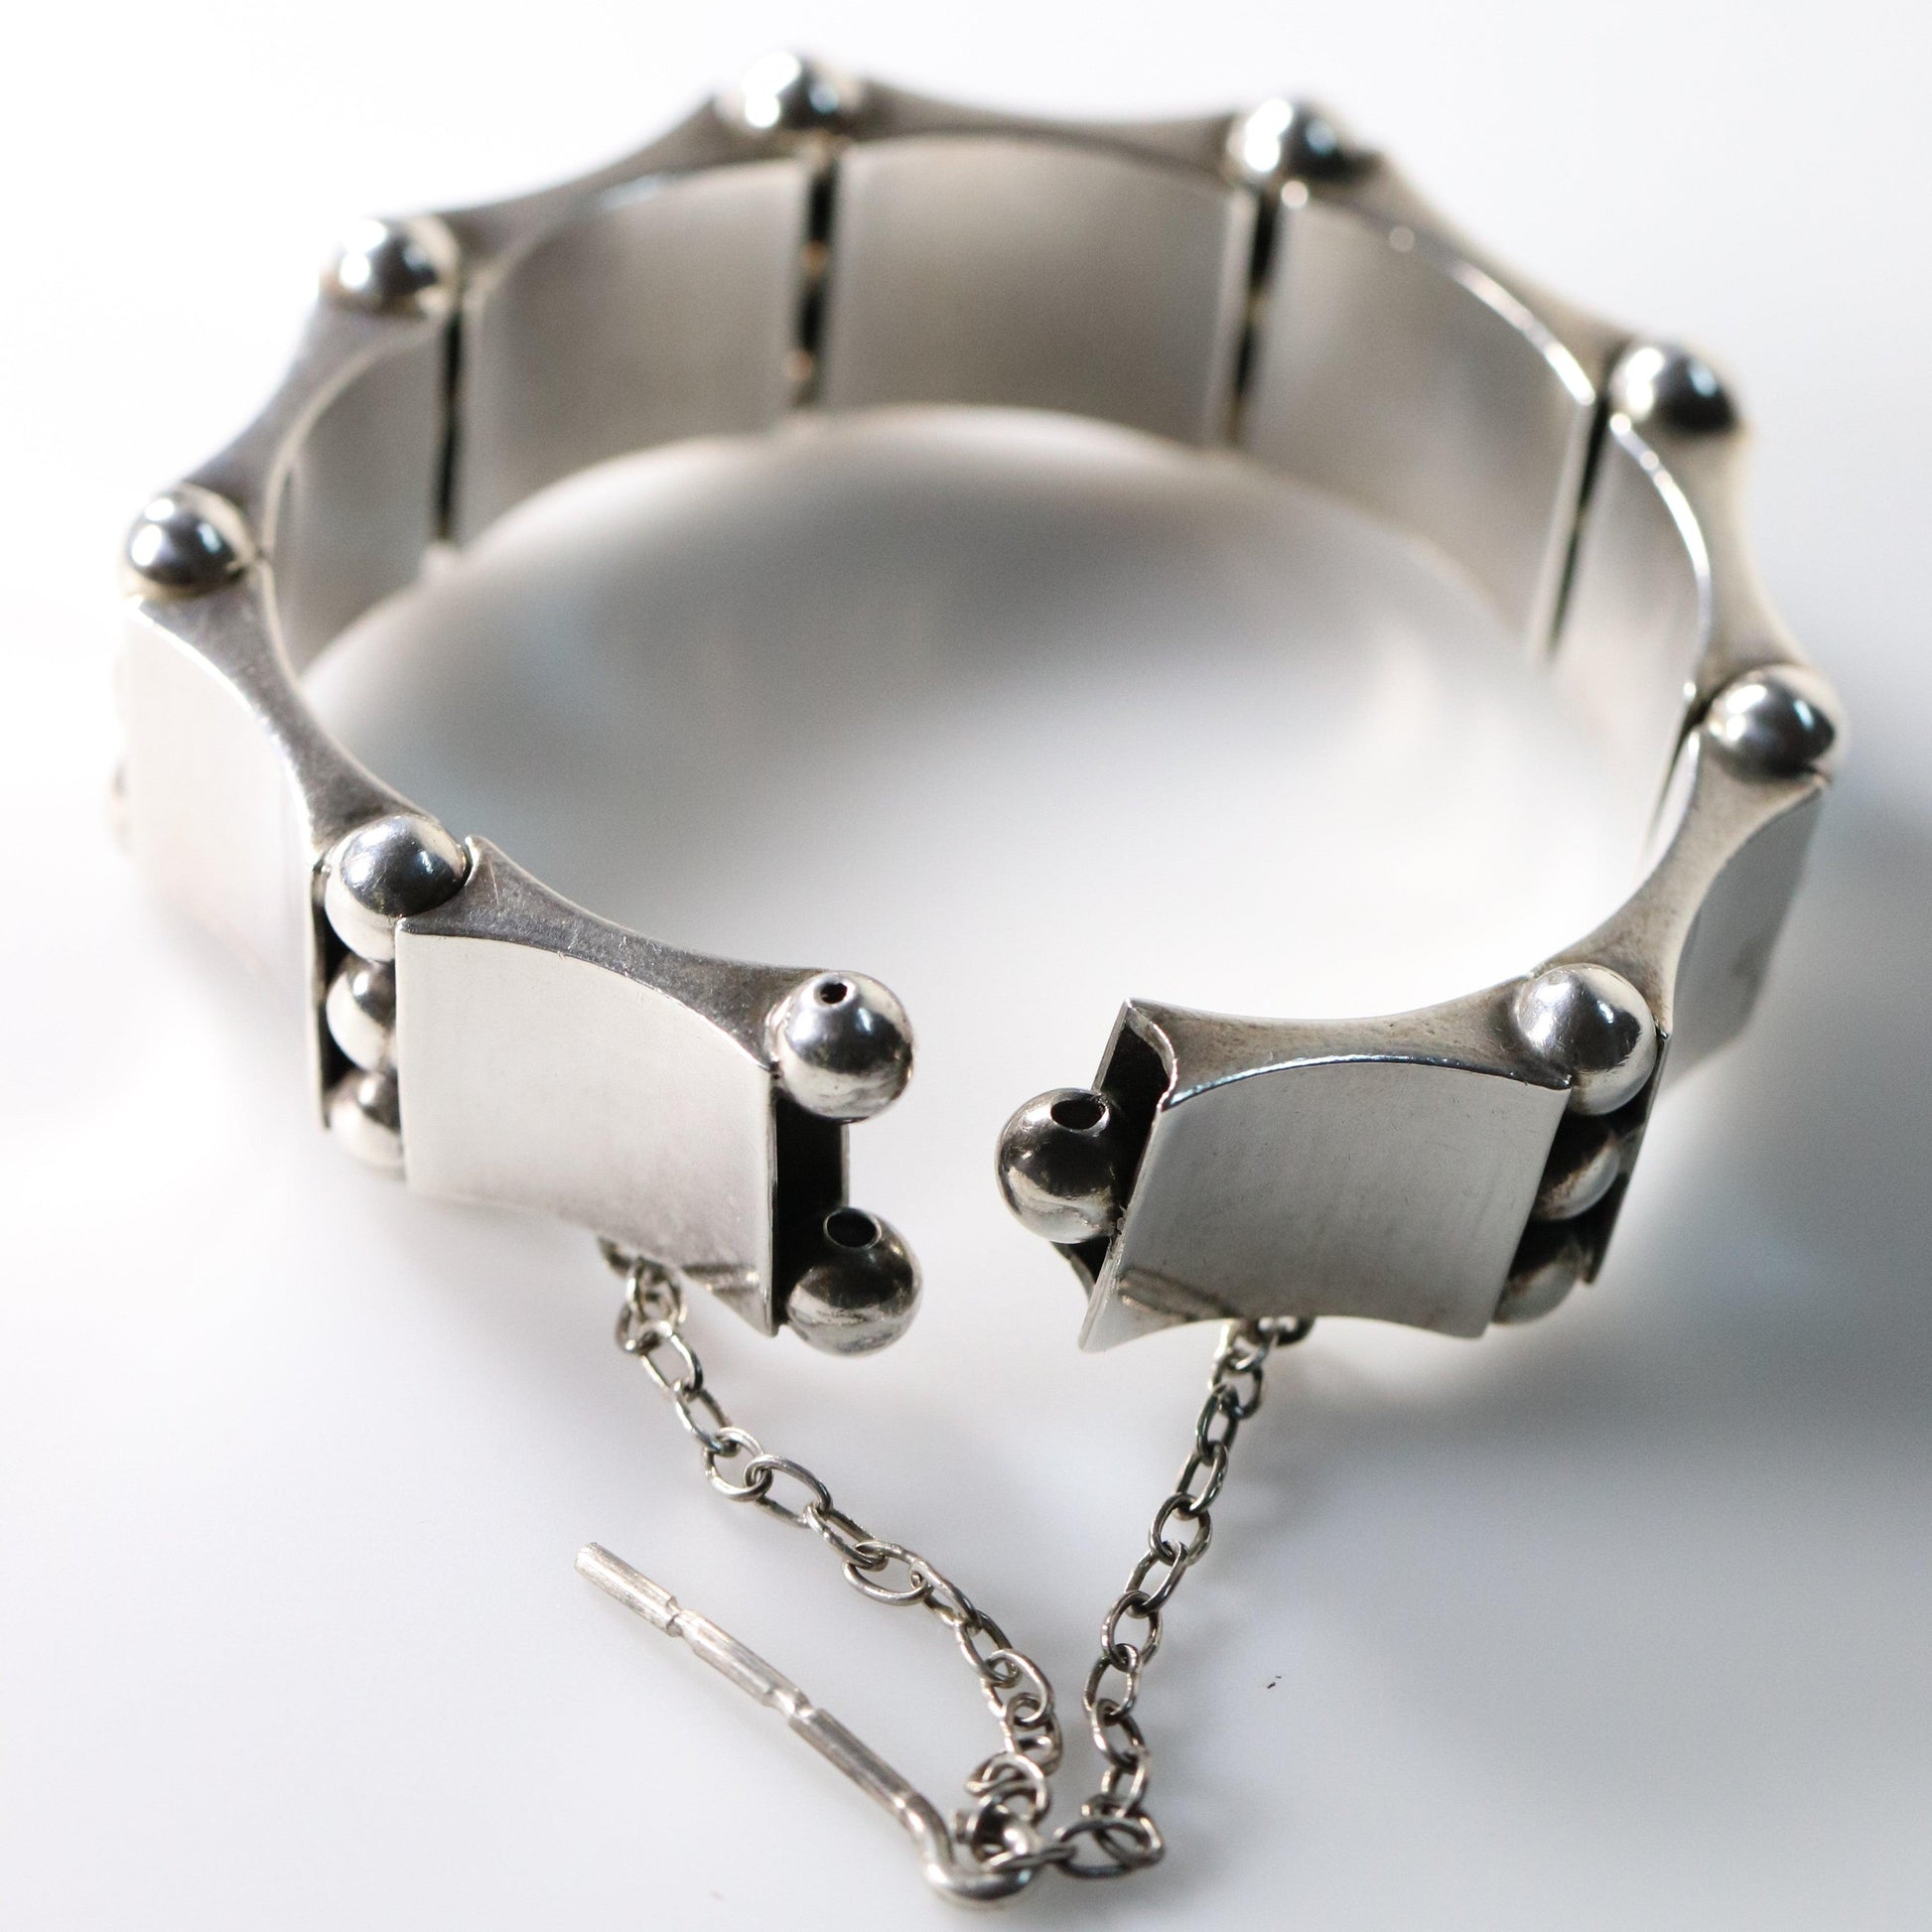 Vintage Hector Aguilar Taxco Jewelry | Concave Panel and Ball Handcrafted Bracelet Mexico - Carmel Fine Silver Jewelry